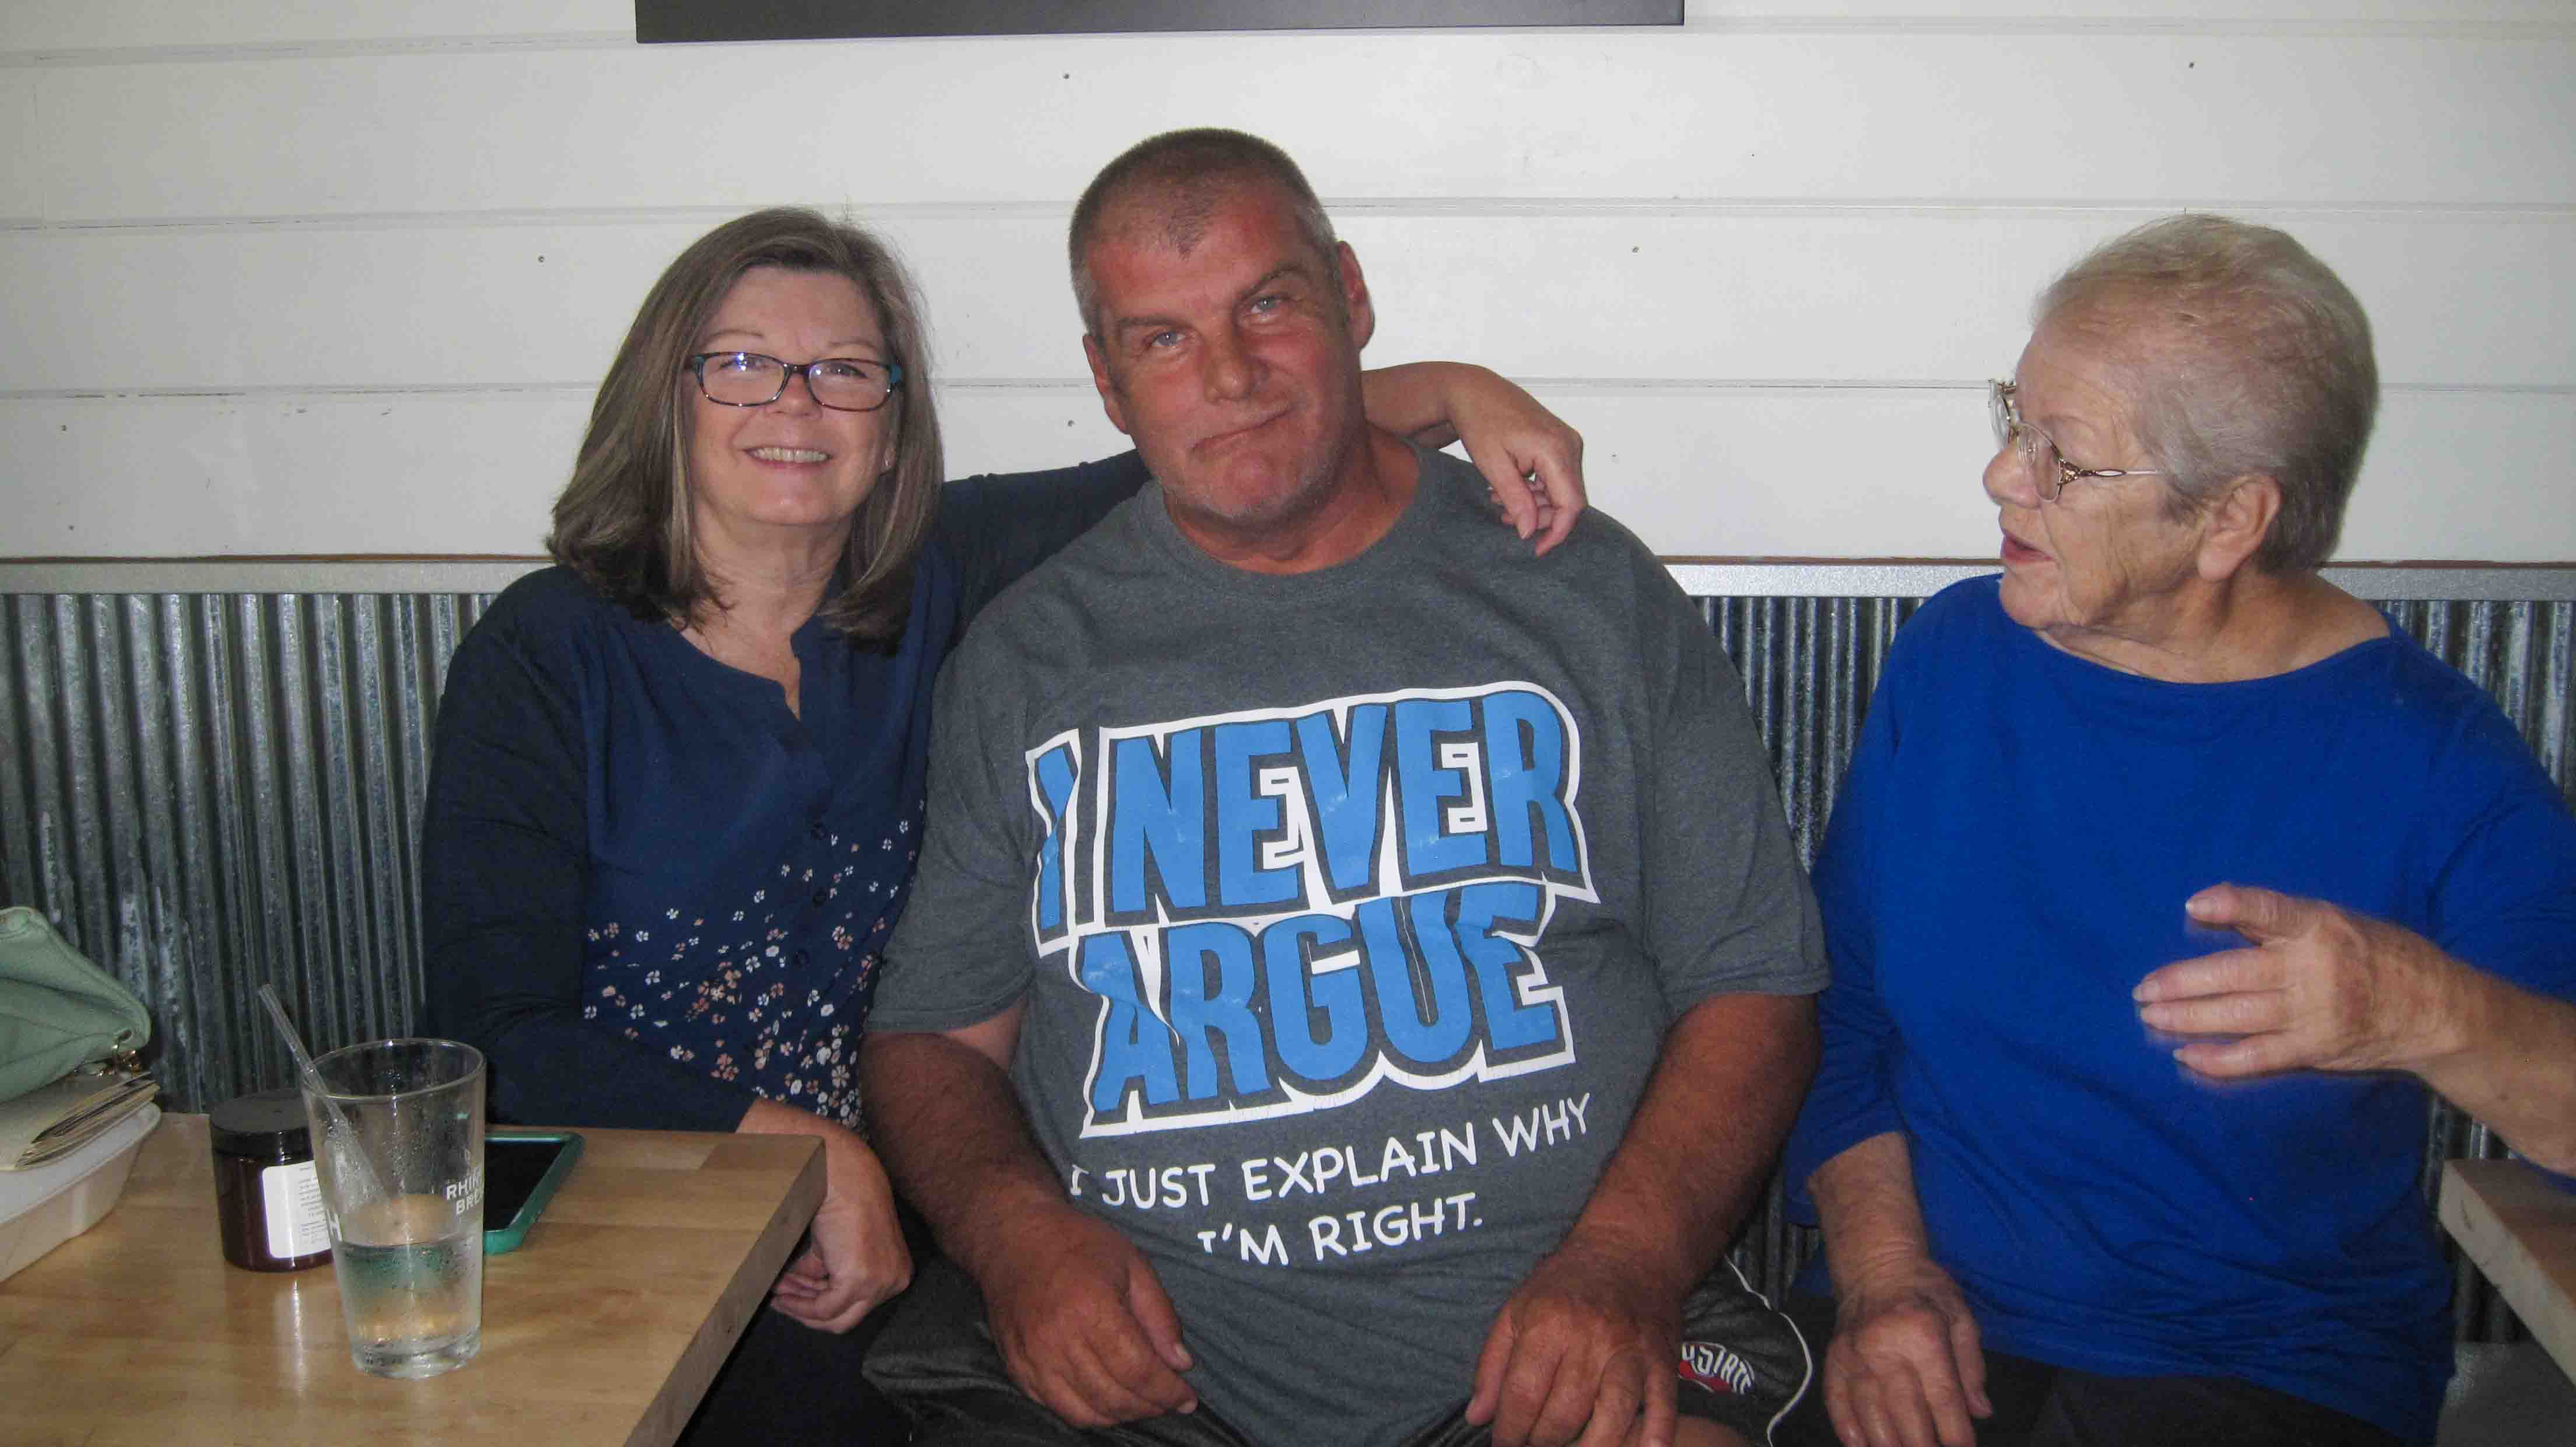 Taken at Sexton's Pizza (owned by Joel's sons).  L2R Tammy Sexton, Rob Sexton, Shirley Sexton.   Location: Gahanna OH  Source: Julane Crabtree  Date:  20 Aug 2021